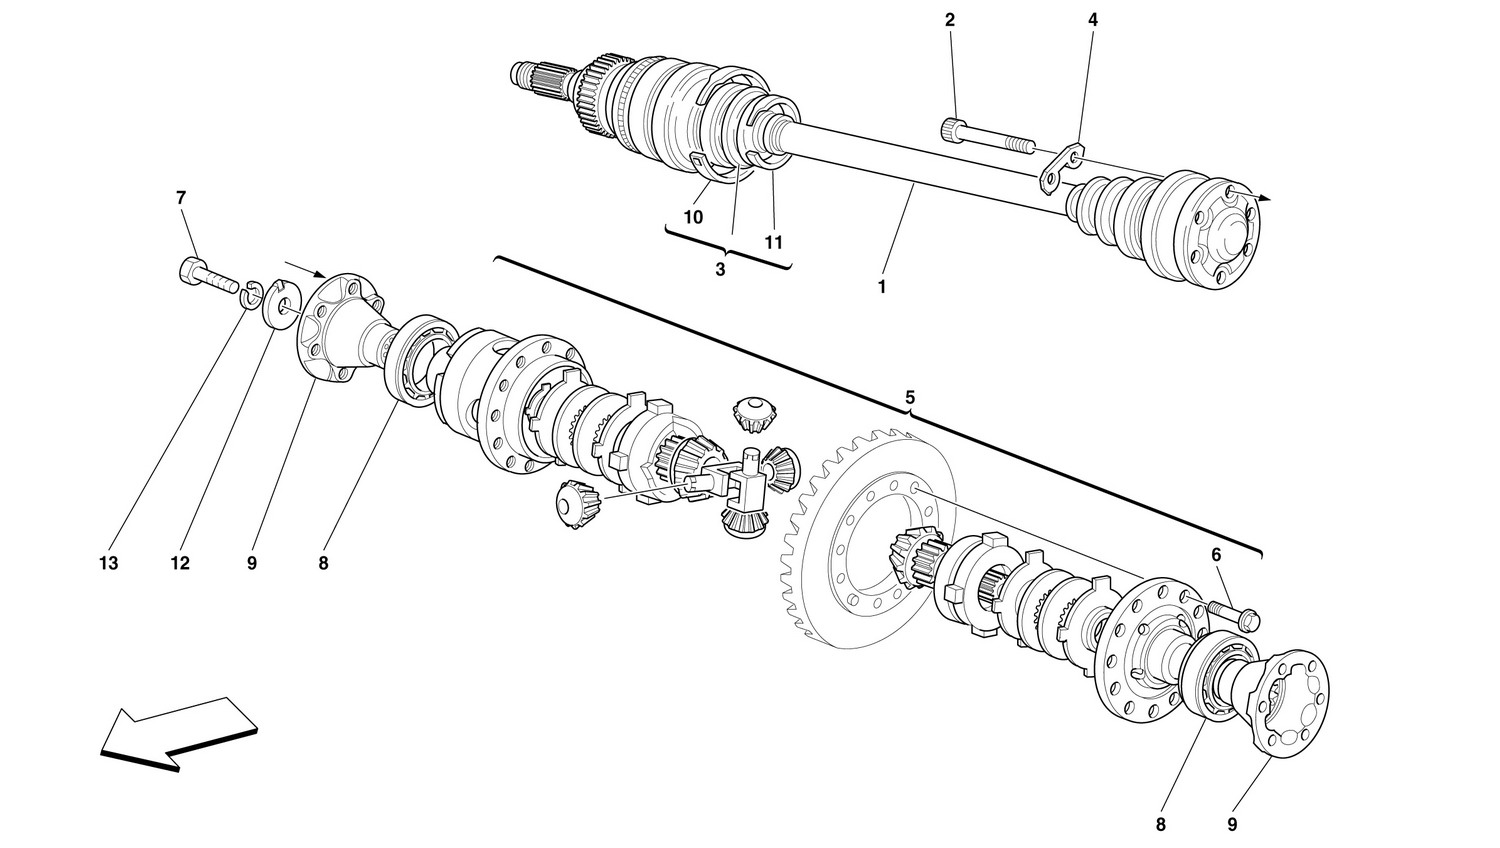 Schematic: Differential And Axle Shaft -Not For 456 Gta